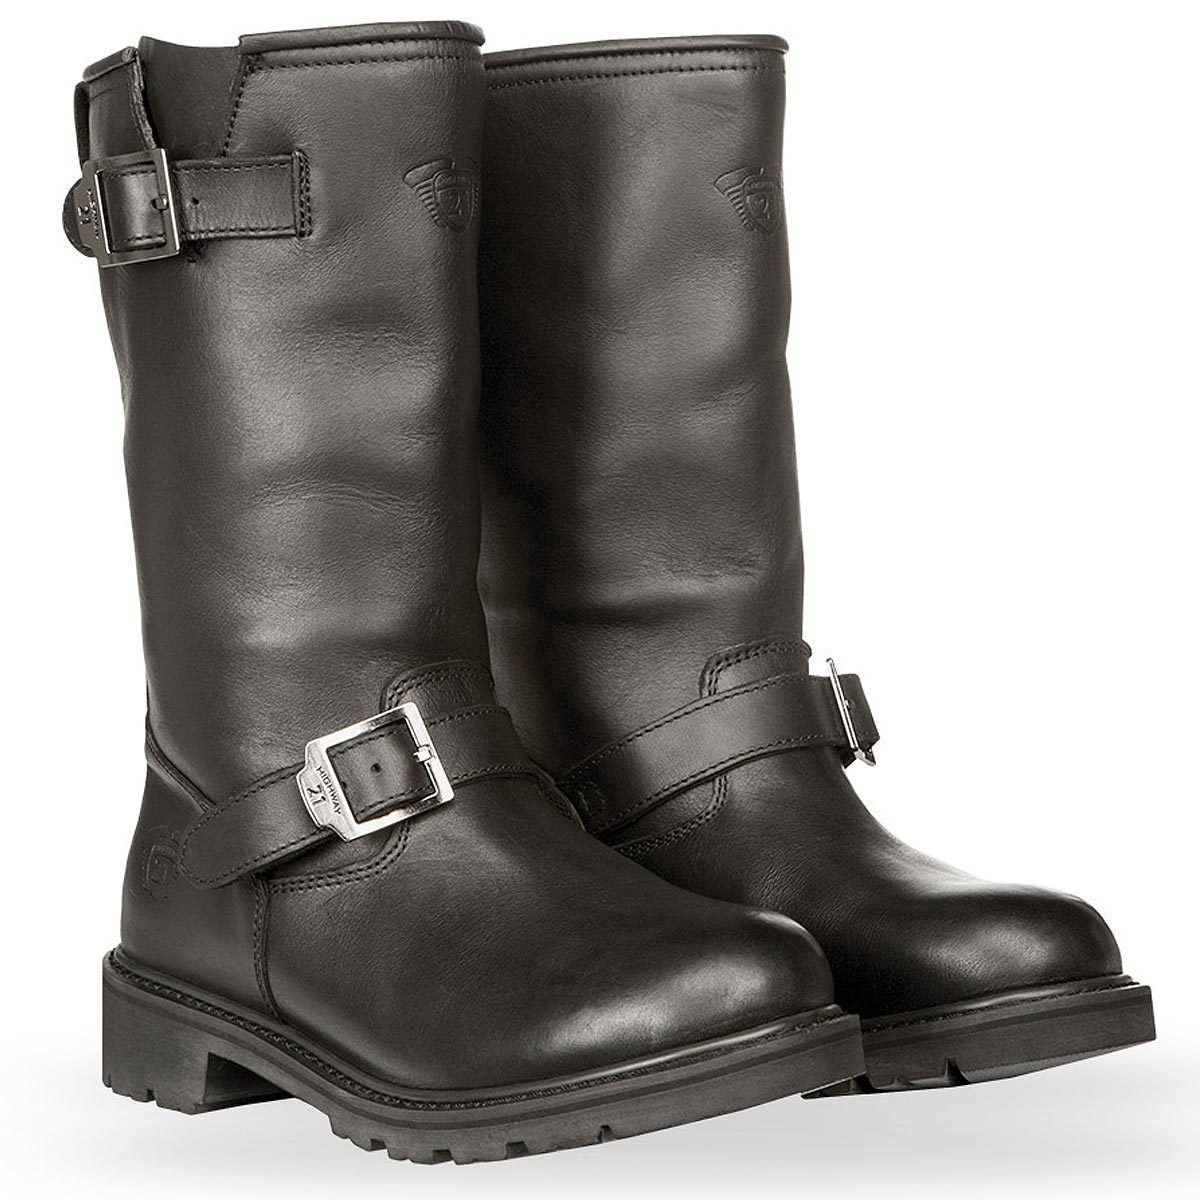 Highway 21 Primary Men's Leather Engineer Boots